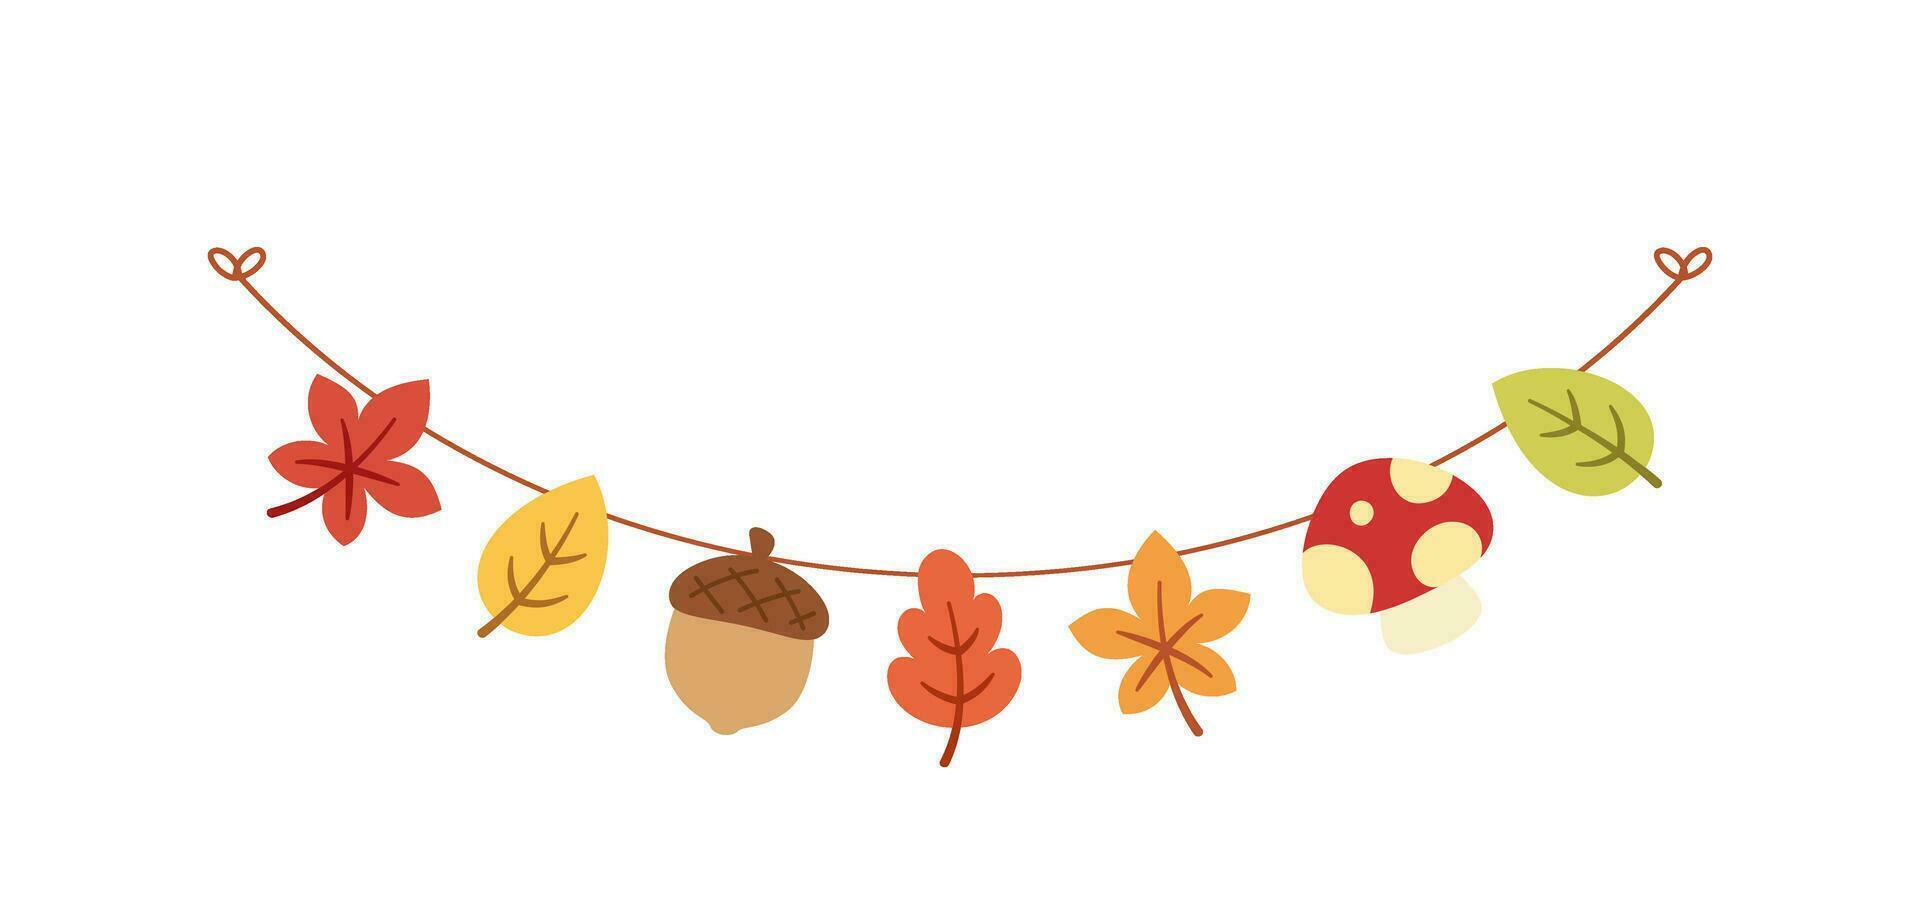 Autumn garland, graphic elements for Fall and Thanksgiving season. Vector isolated on white background.